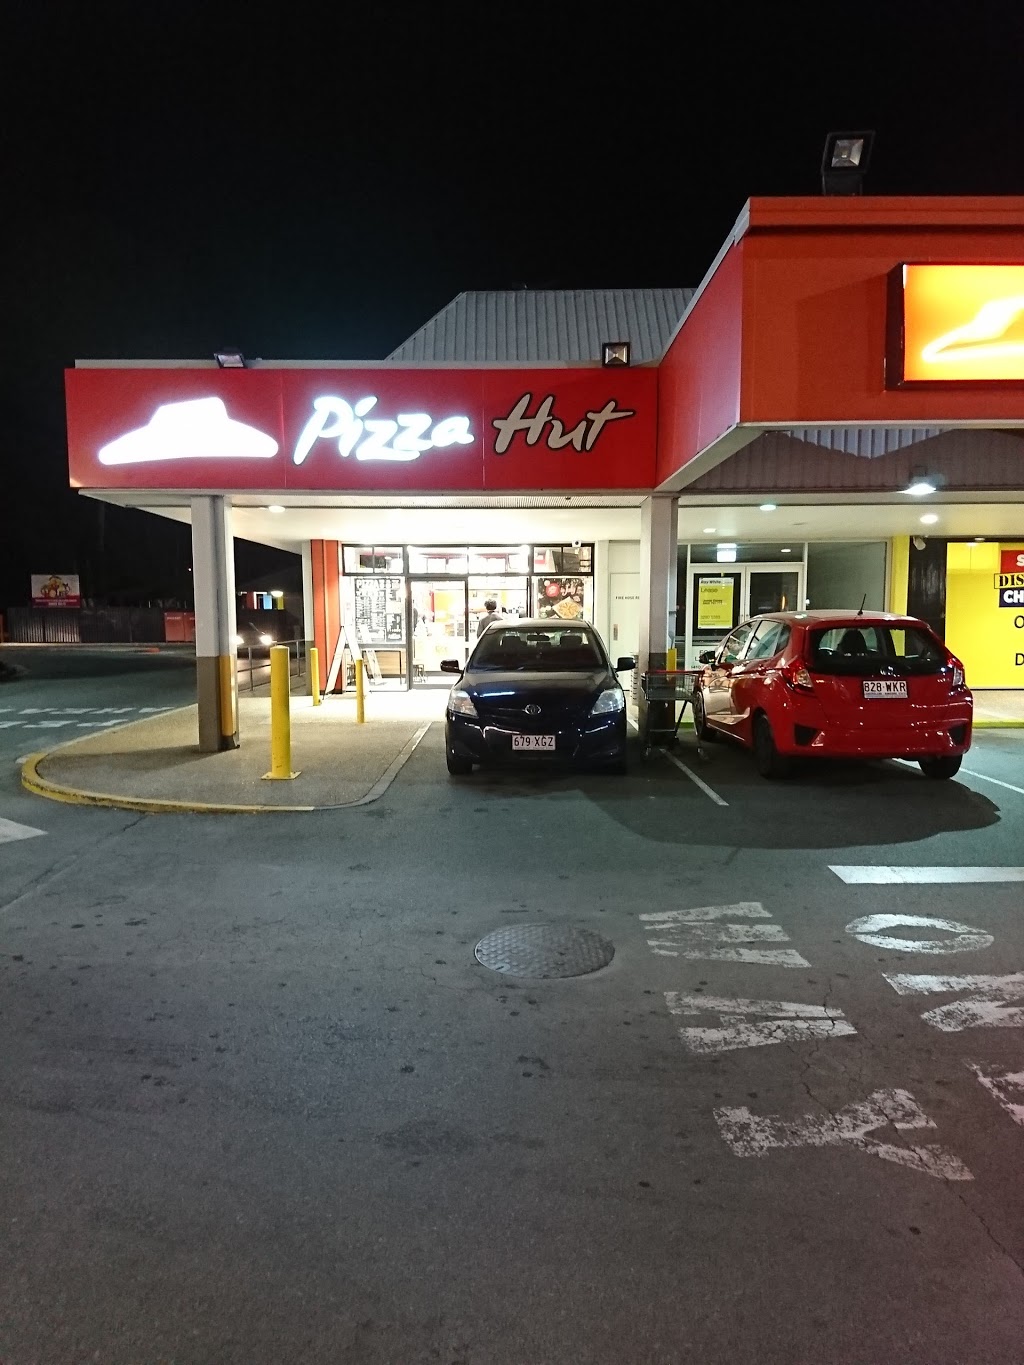 Pizza Hut Waterford West | Shop 29 Waterford West Shopping Plaza, 917 Kingston Rd, Waterford West QLD 4133, Australia | Phone: 13 11 66